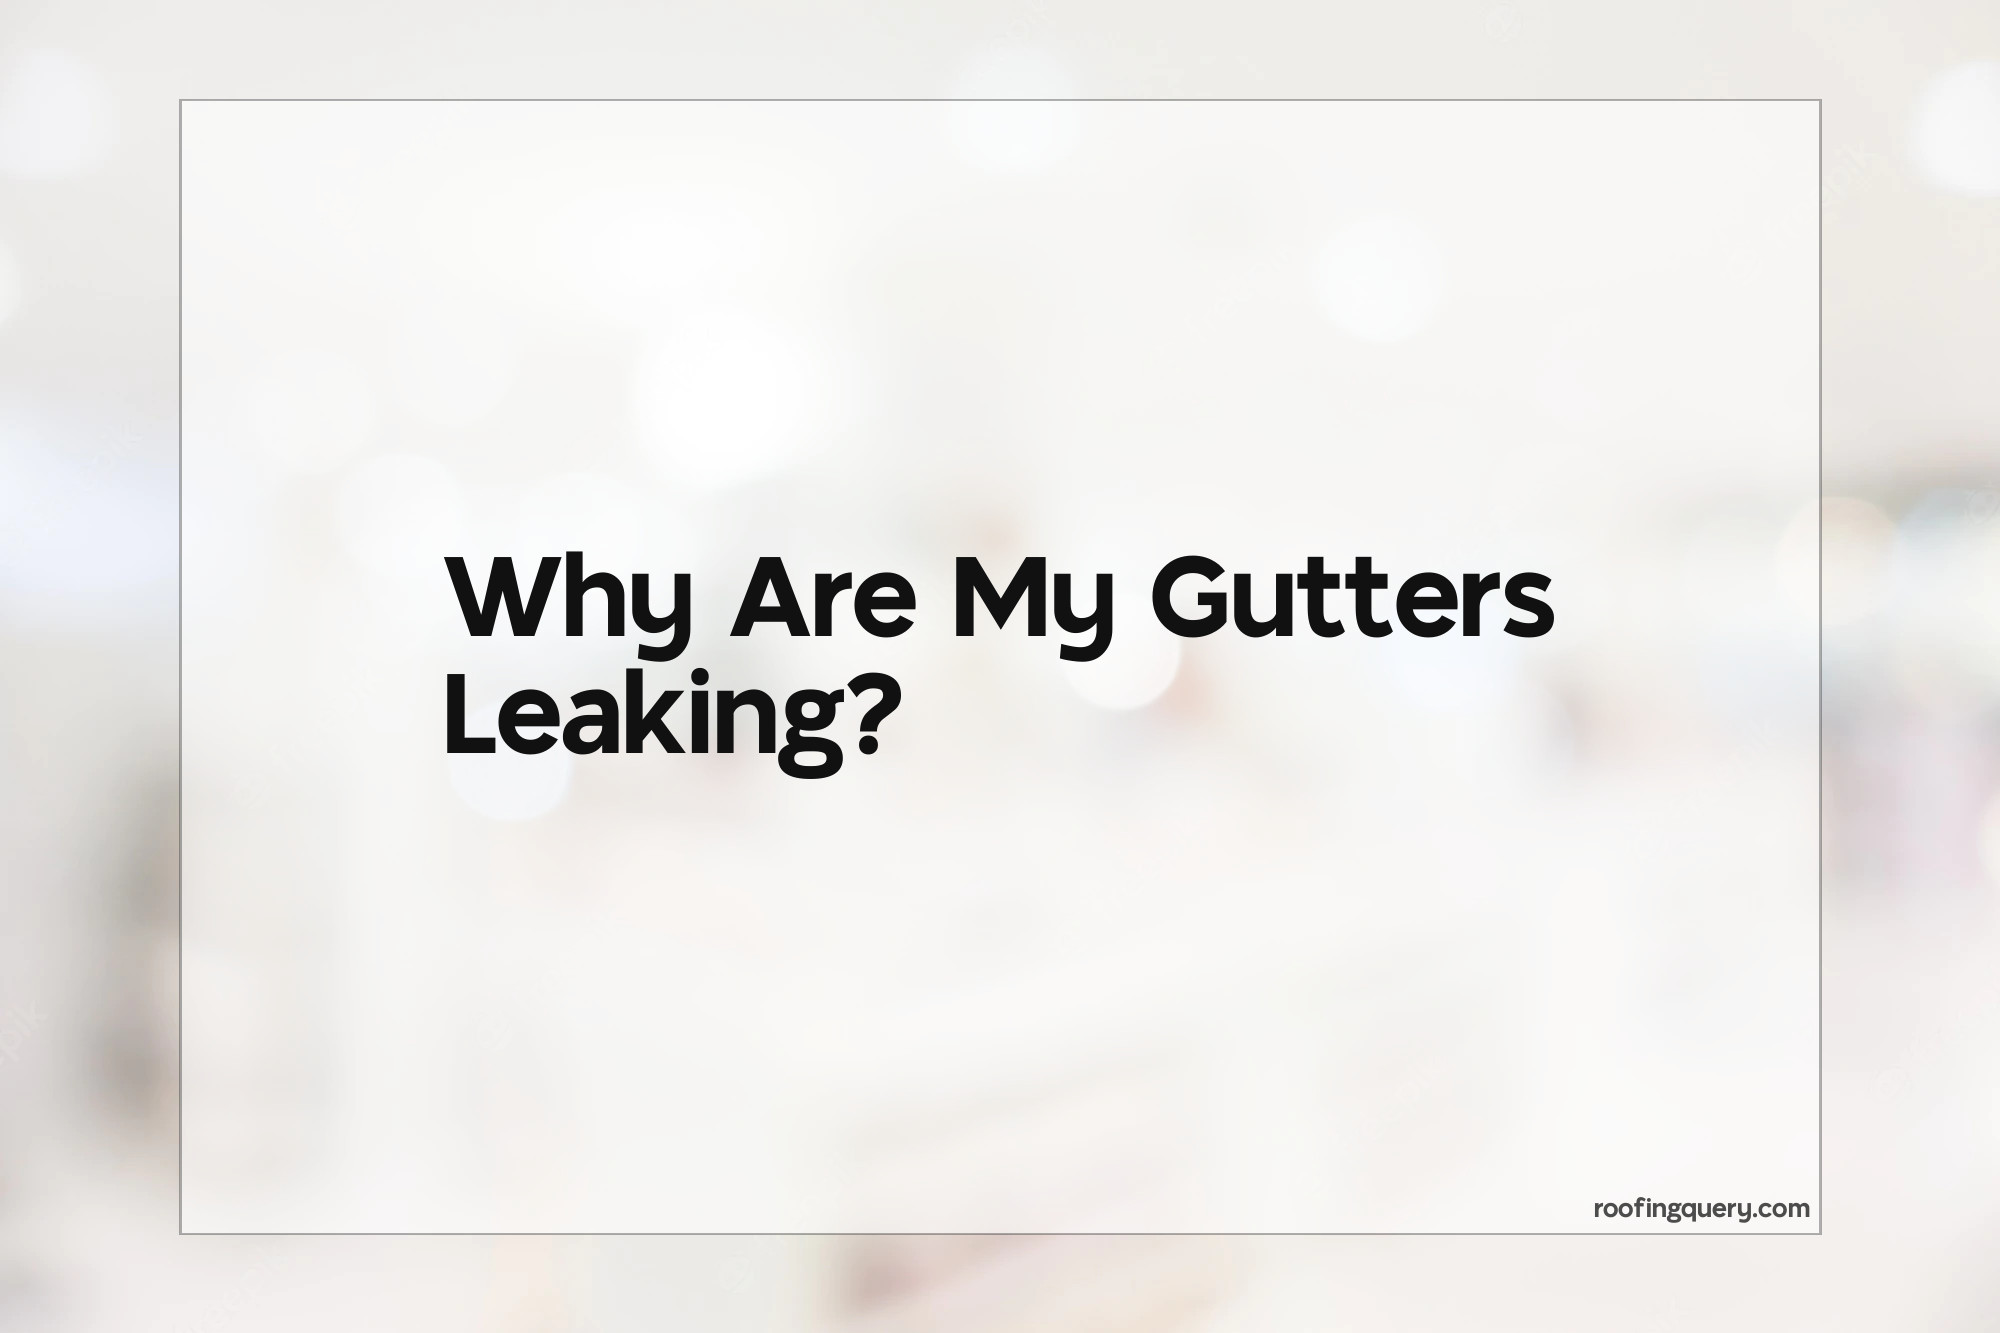 Why Are My Gutters Leaking